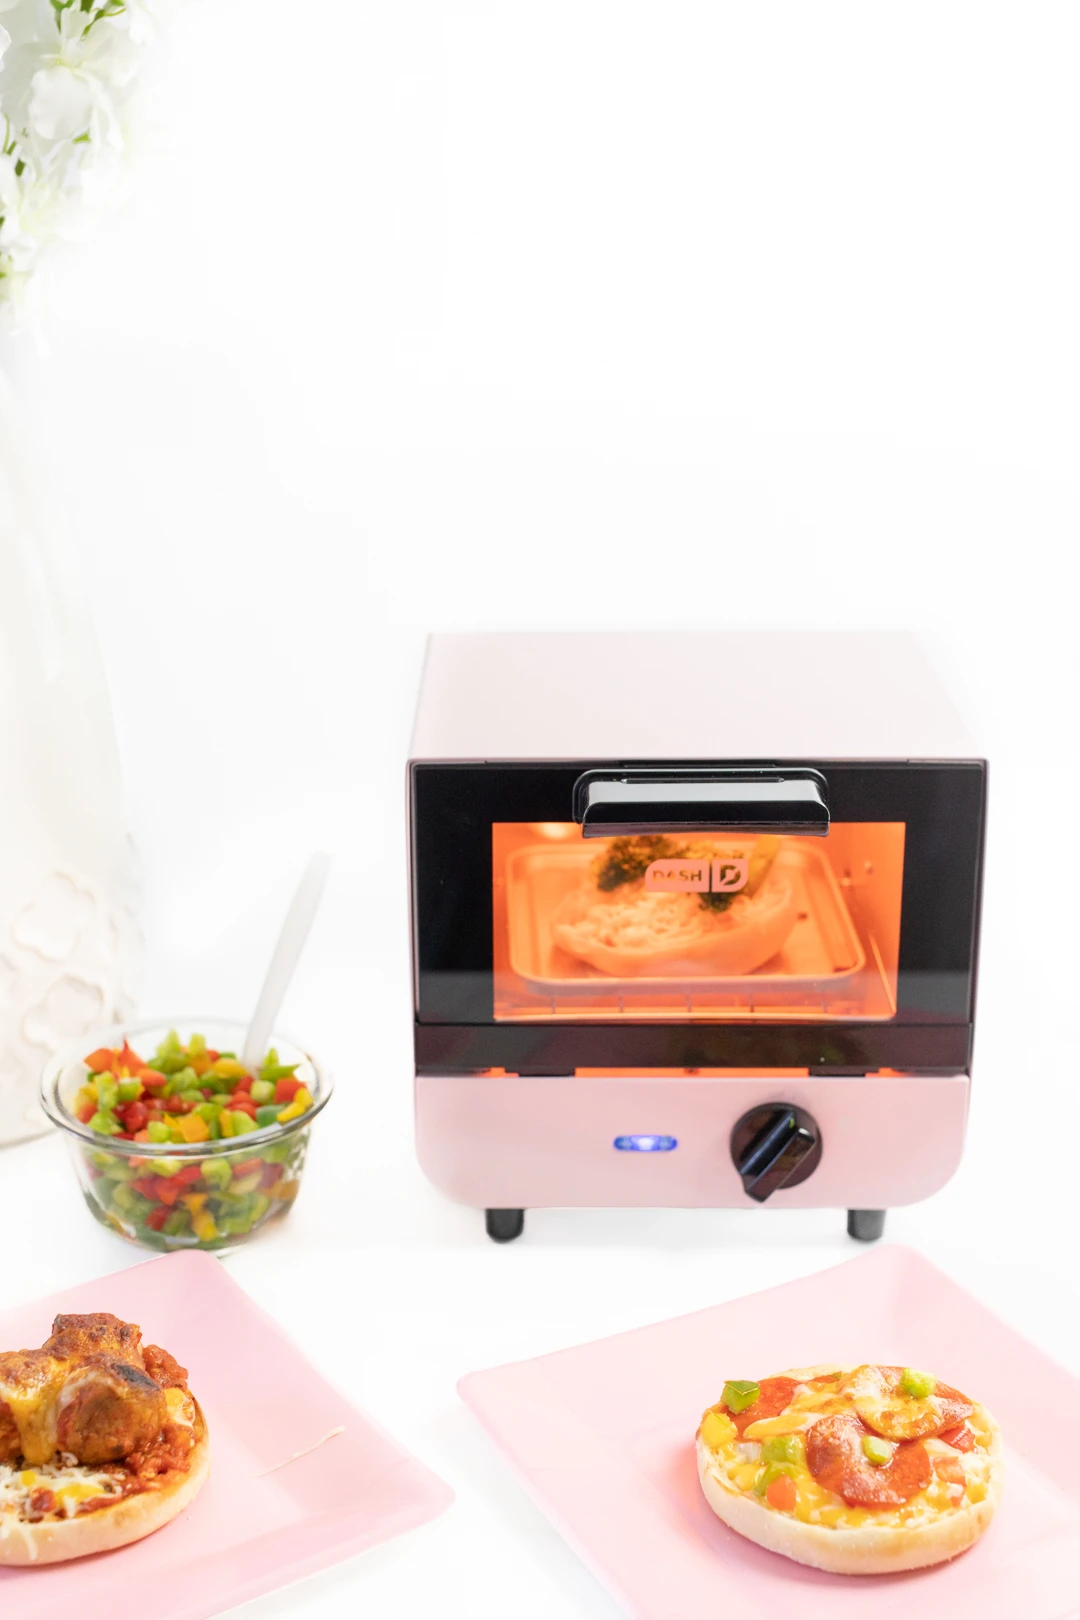 Mini Toaster Oven toasting an english muffin pizza